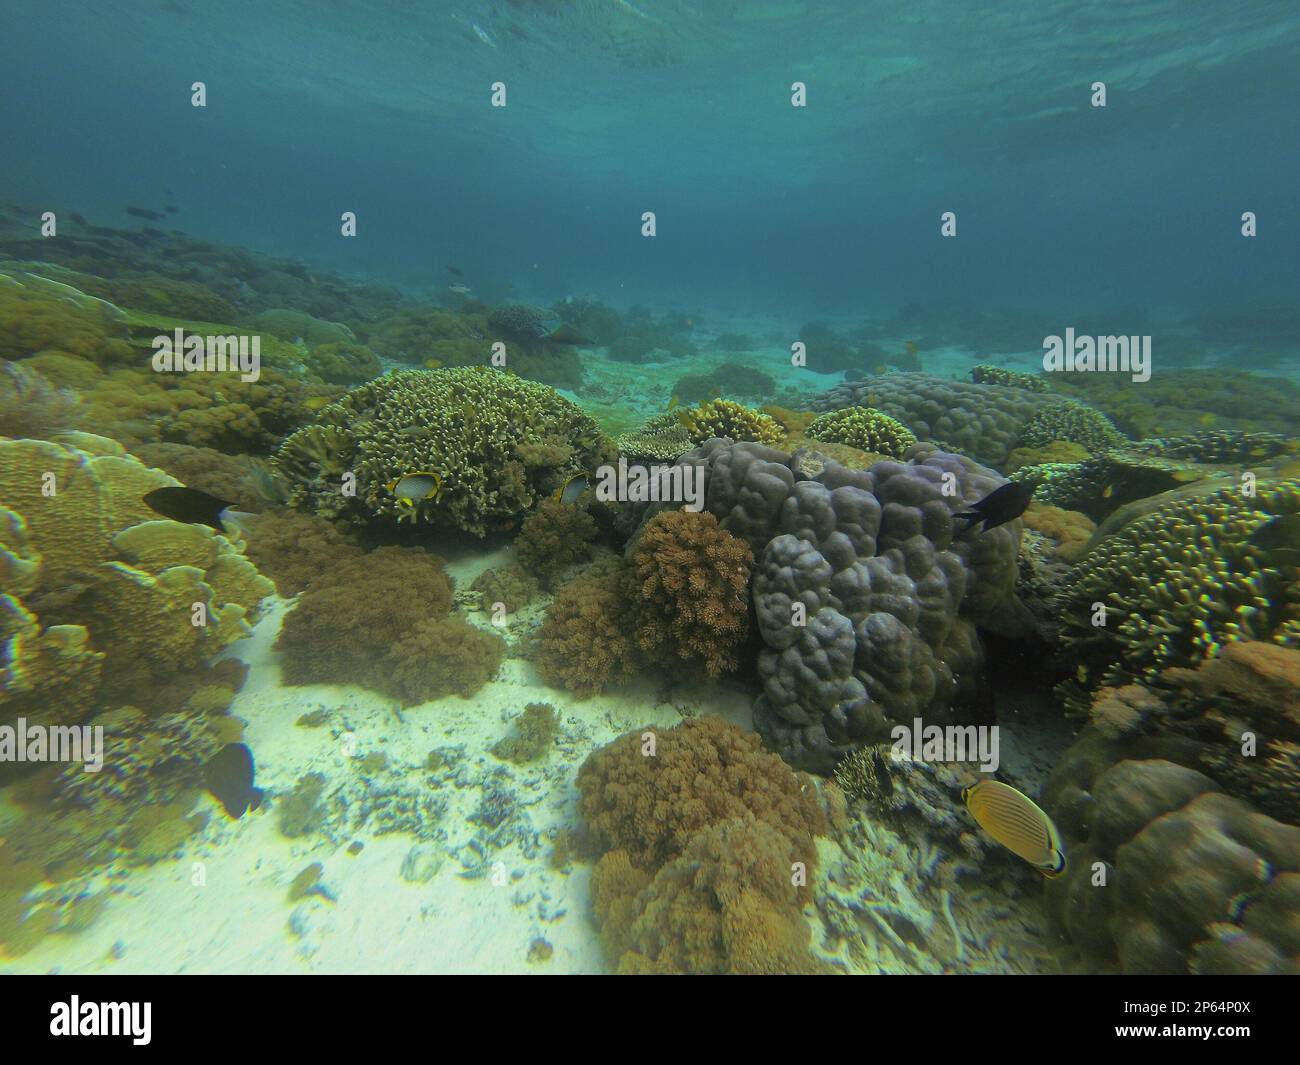 Photograph of a coral reef surrounded by fishes in Komodo National Park on Flores. Stock Photo